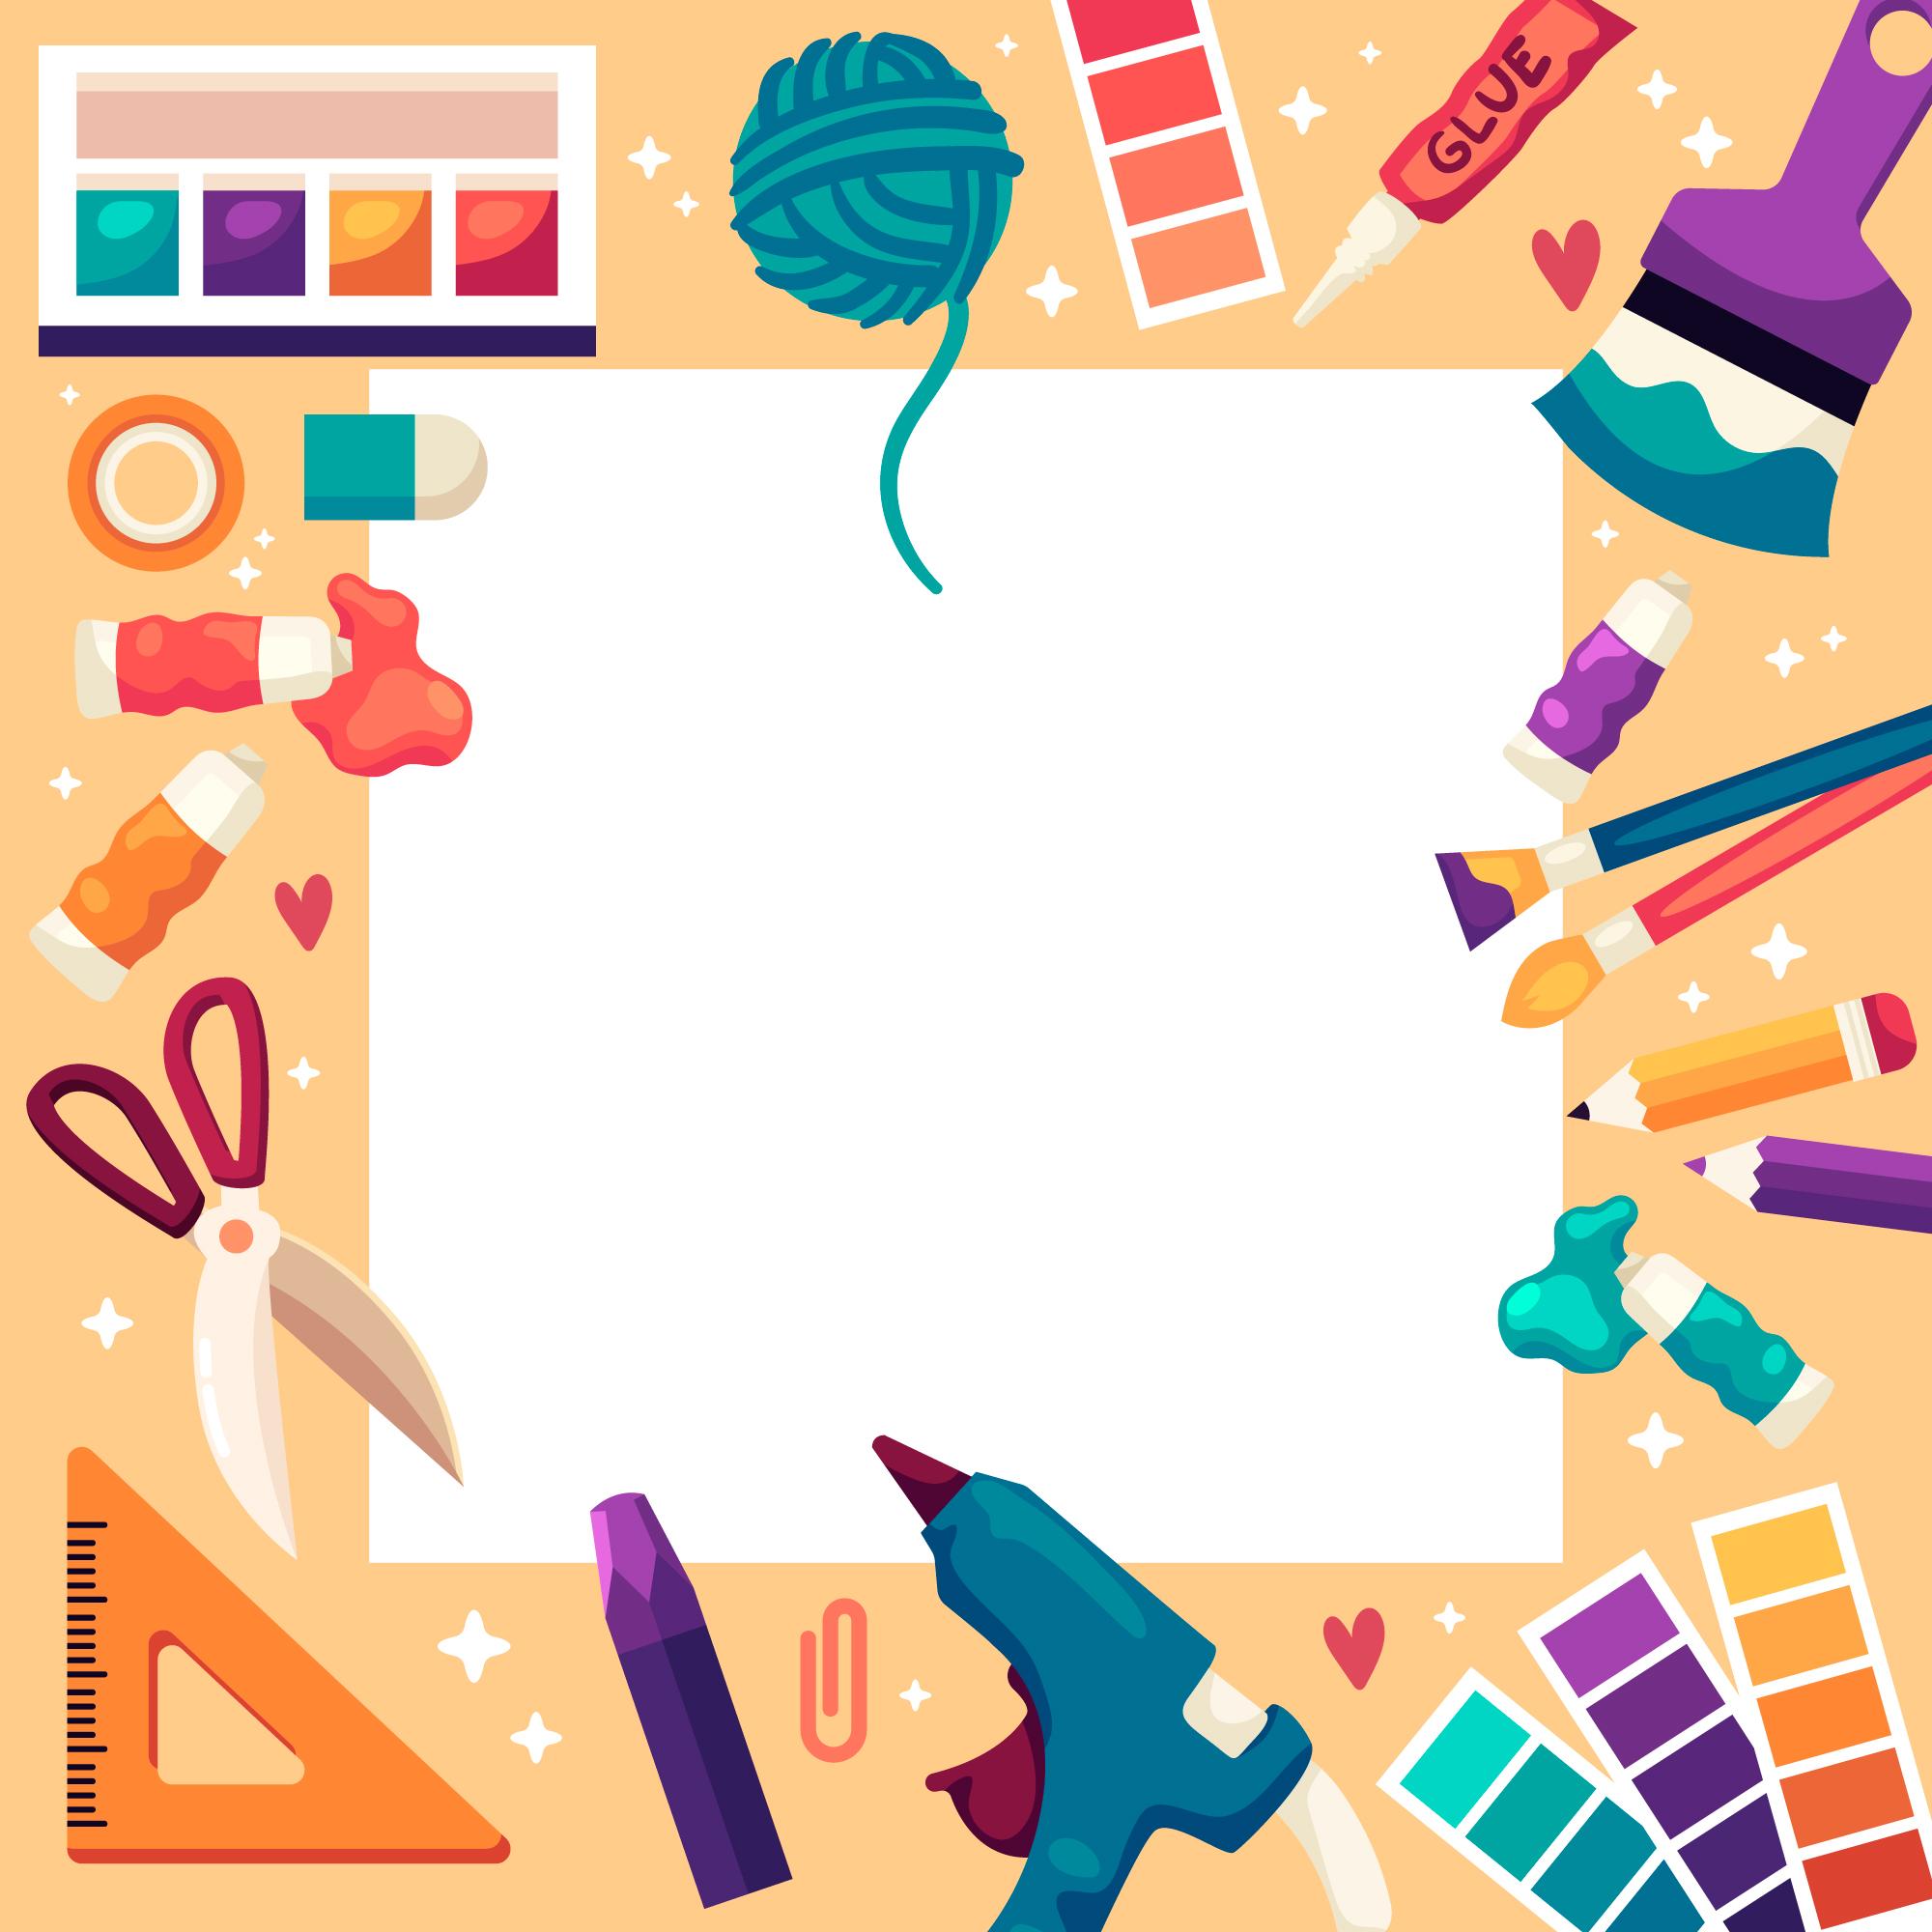 a white square paper surrounded by cartoon style drawings of  paints, glue guns, yarn, and other craft supplies